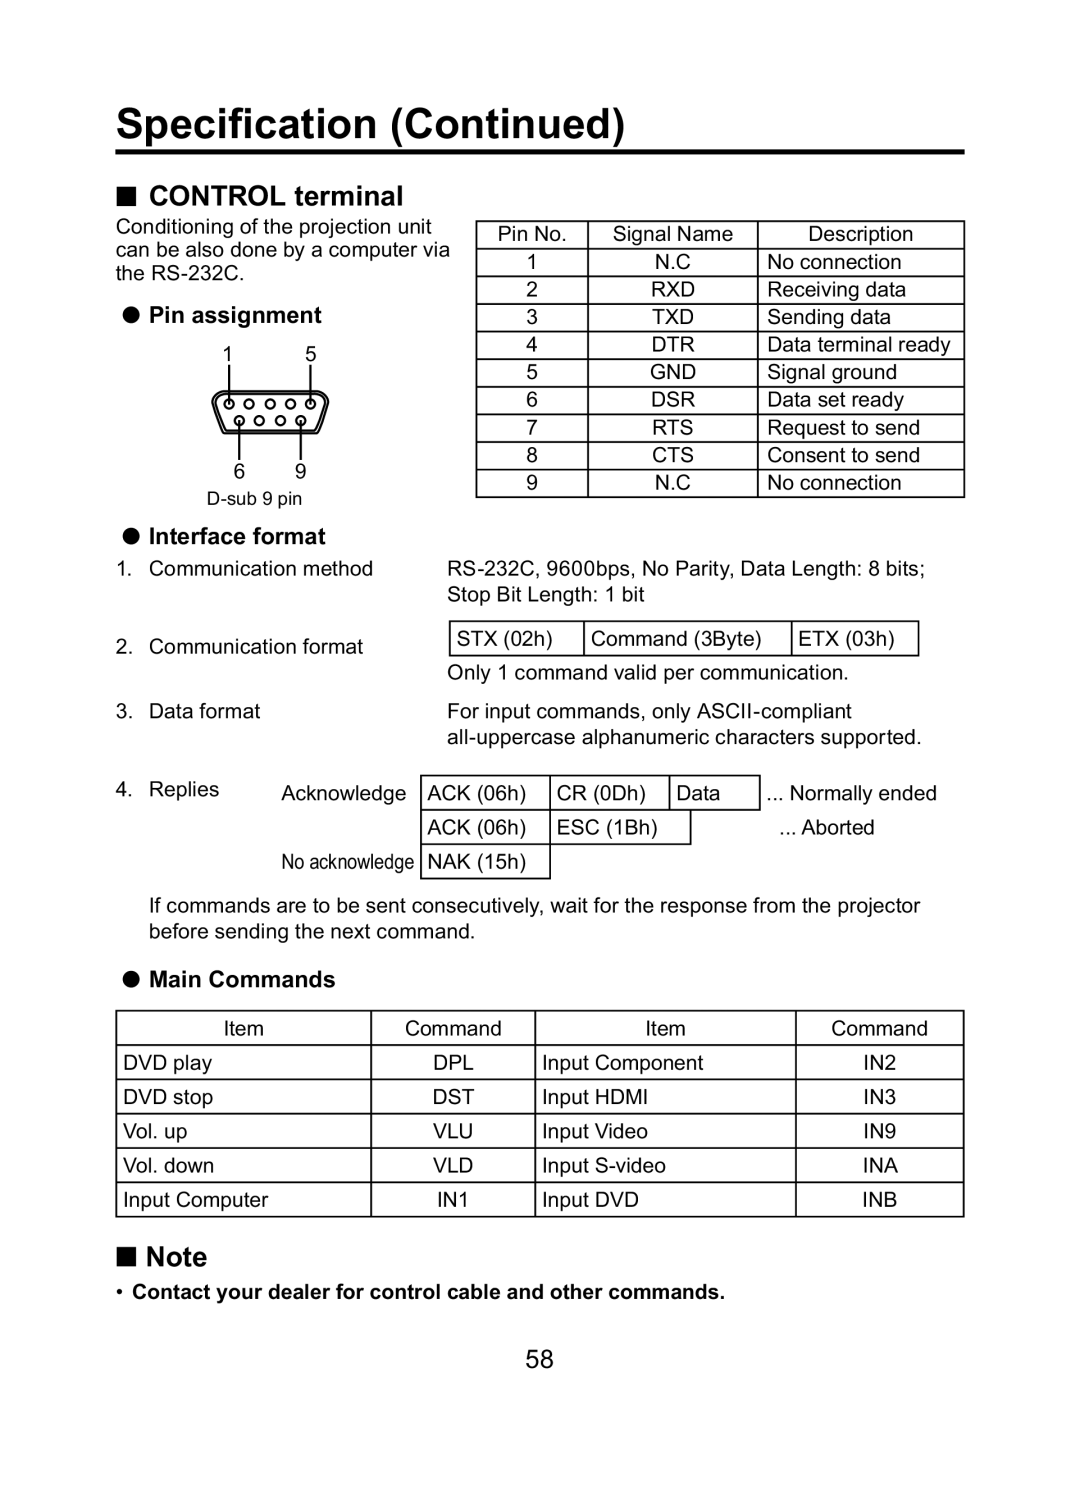 Toshiba TDP-ET10 owner manual Speciﬁcation Continued, CONTROL terminal, Pin assignment, Interface format, Main Commands 